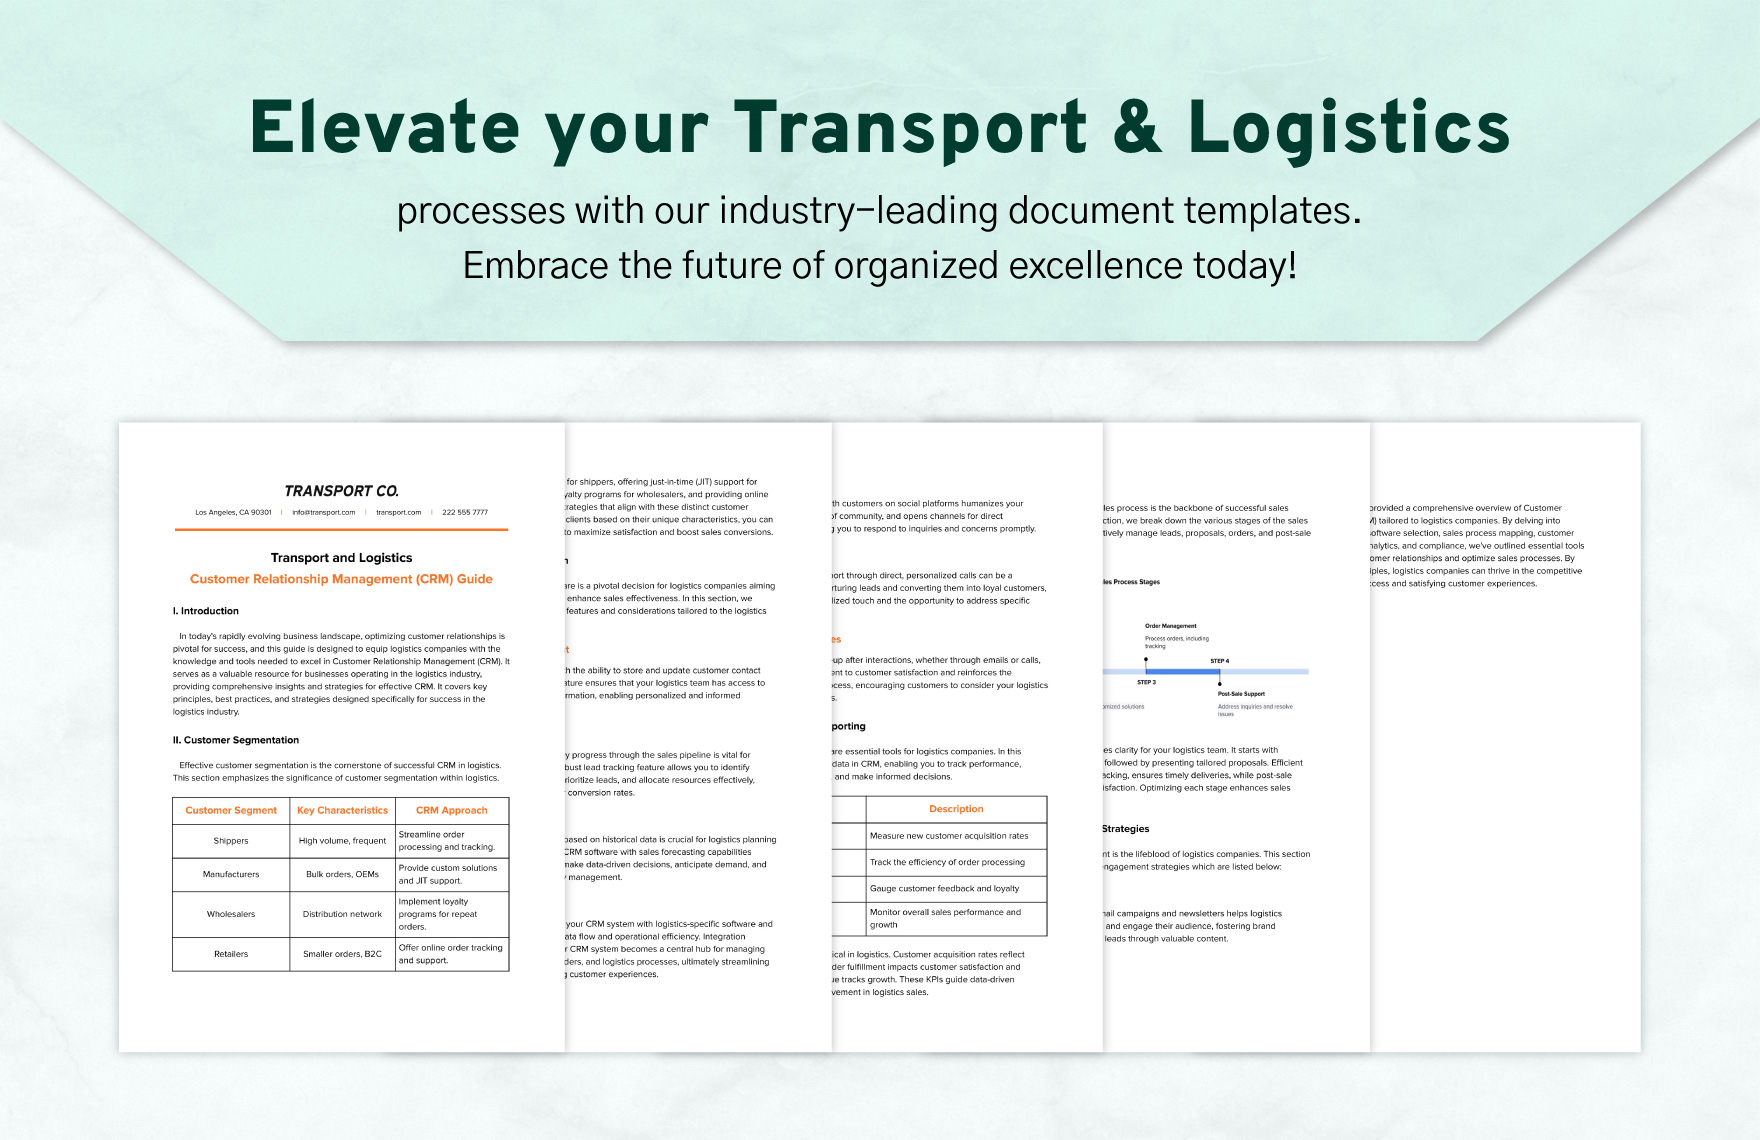 Transport and Logistics Customer Relationship Management (CRM) Guide Template